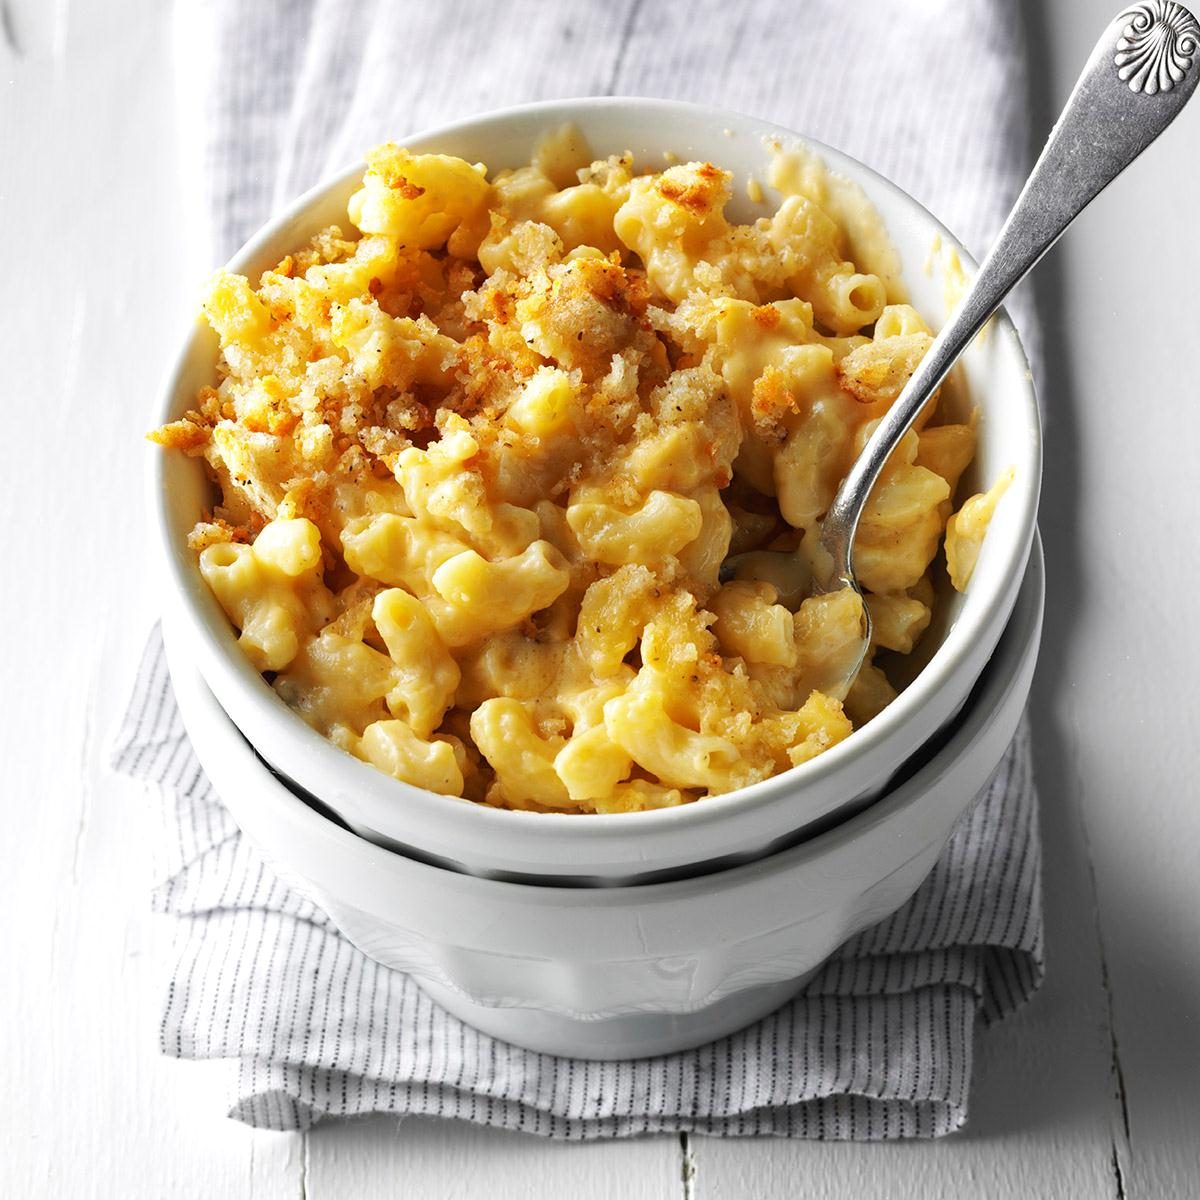 Popular Kraft Mac And Cheese Flavors Ranked From Worst To Best